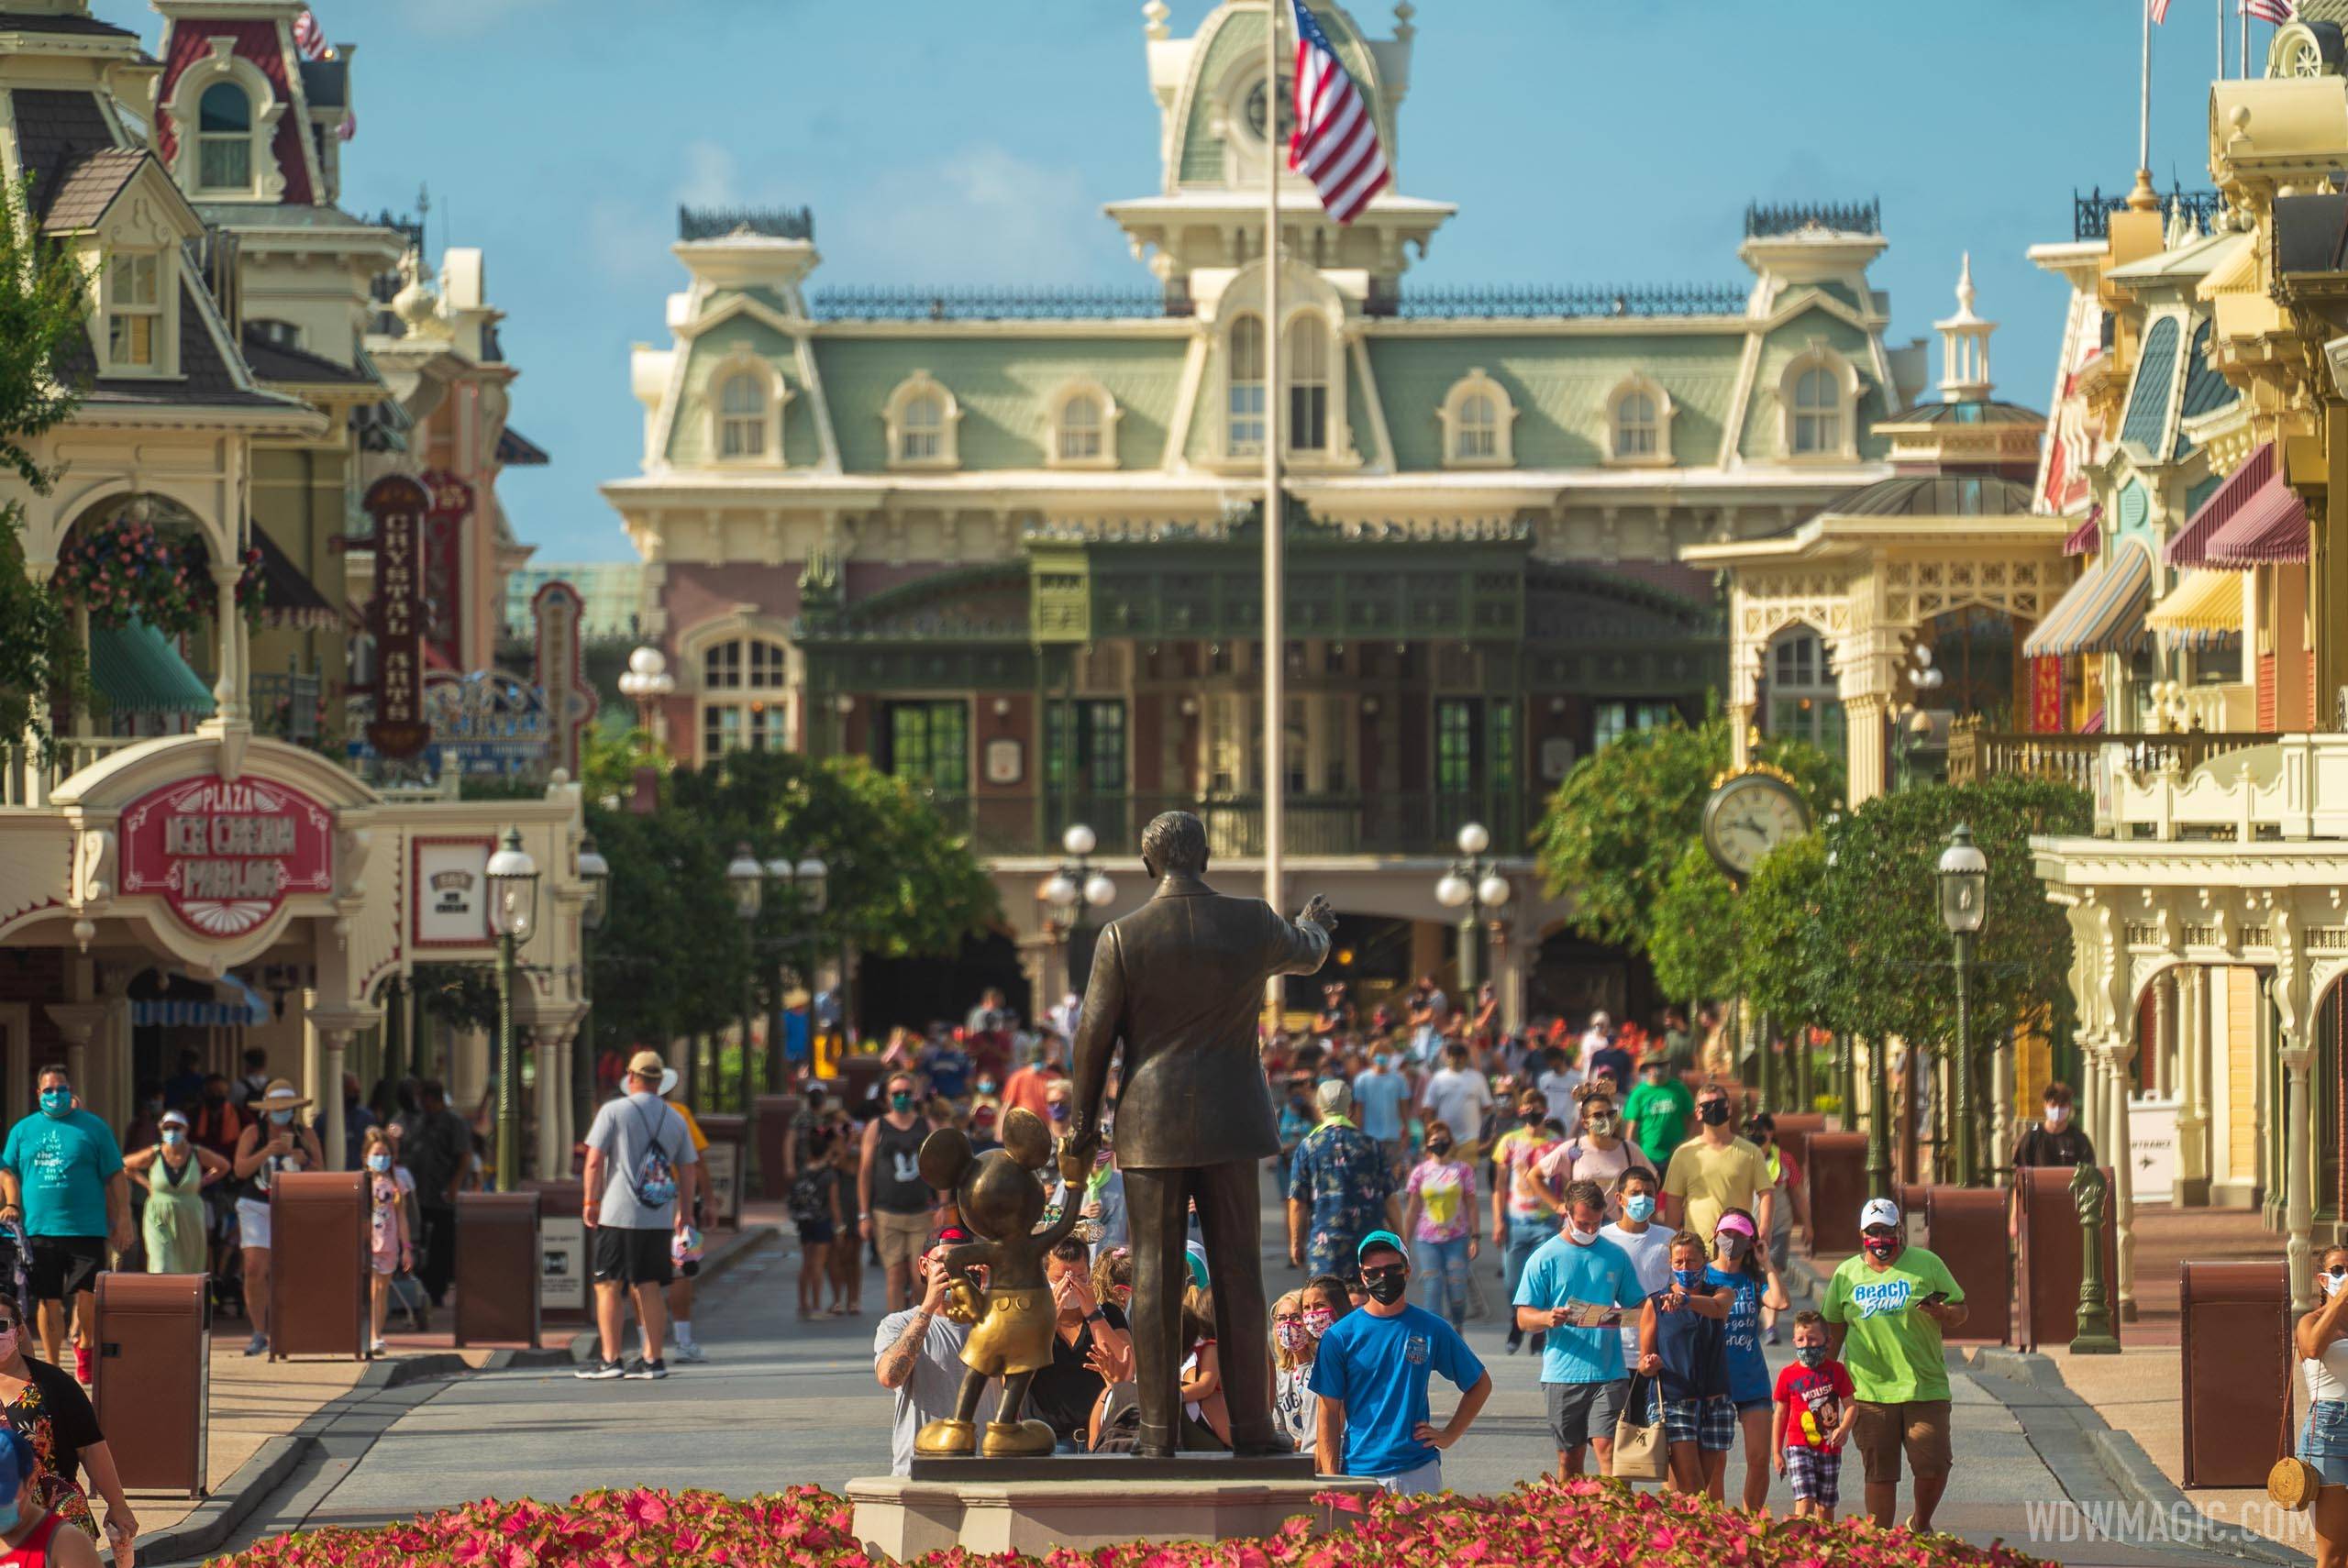 Magic Kingdom is a popular choice for returning guests